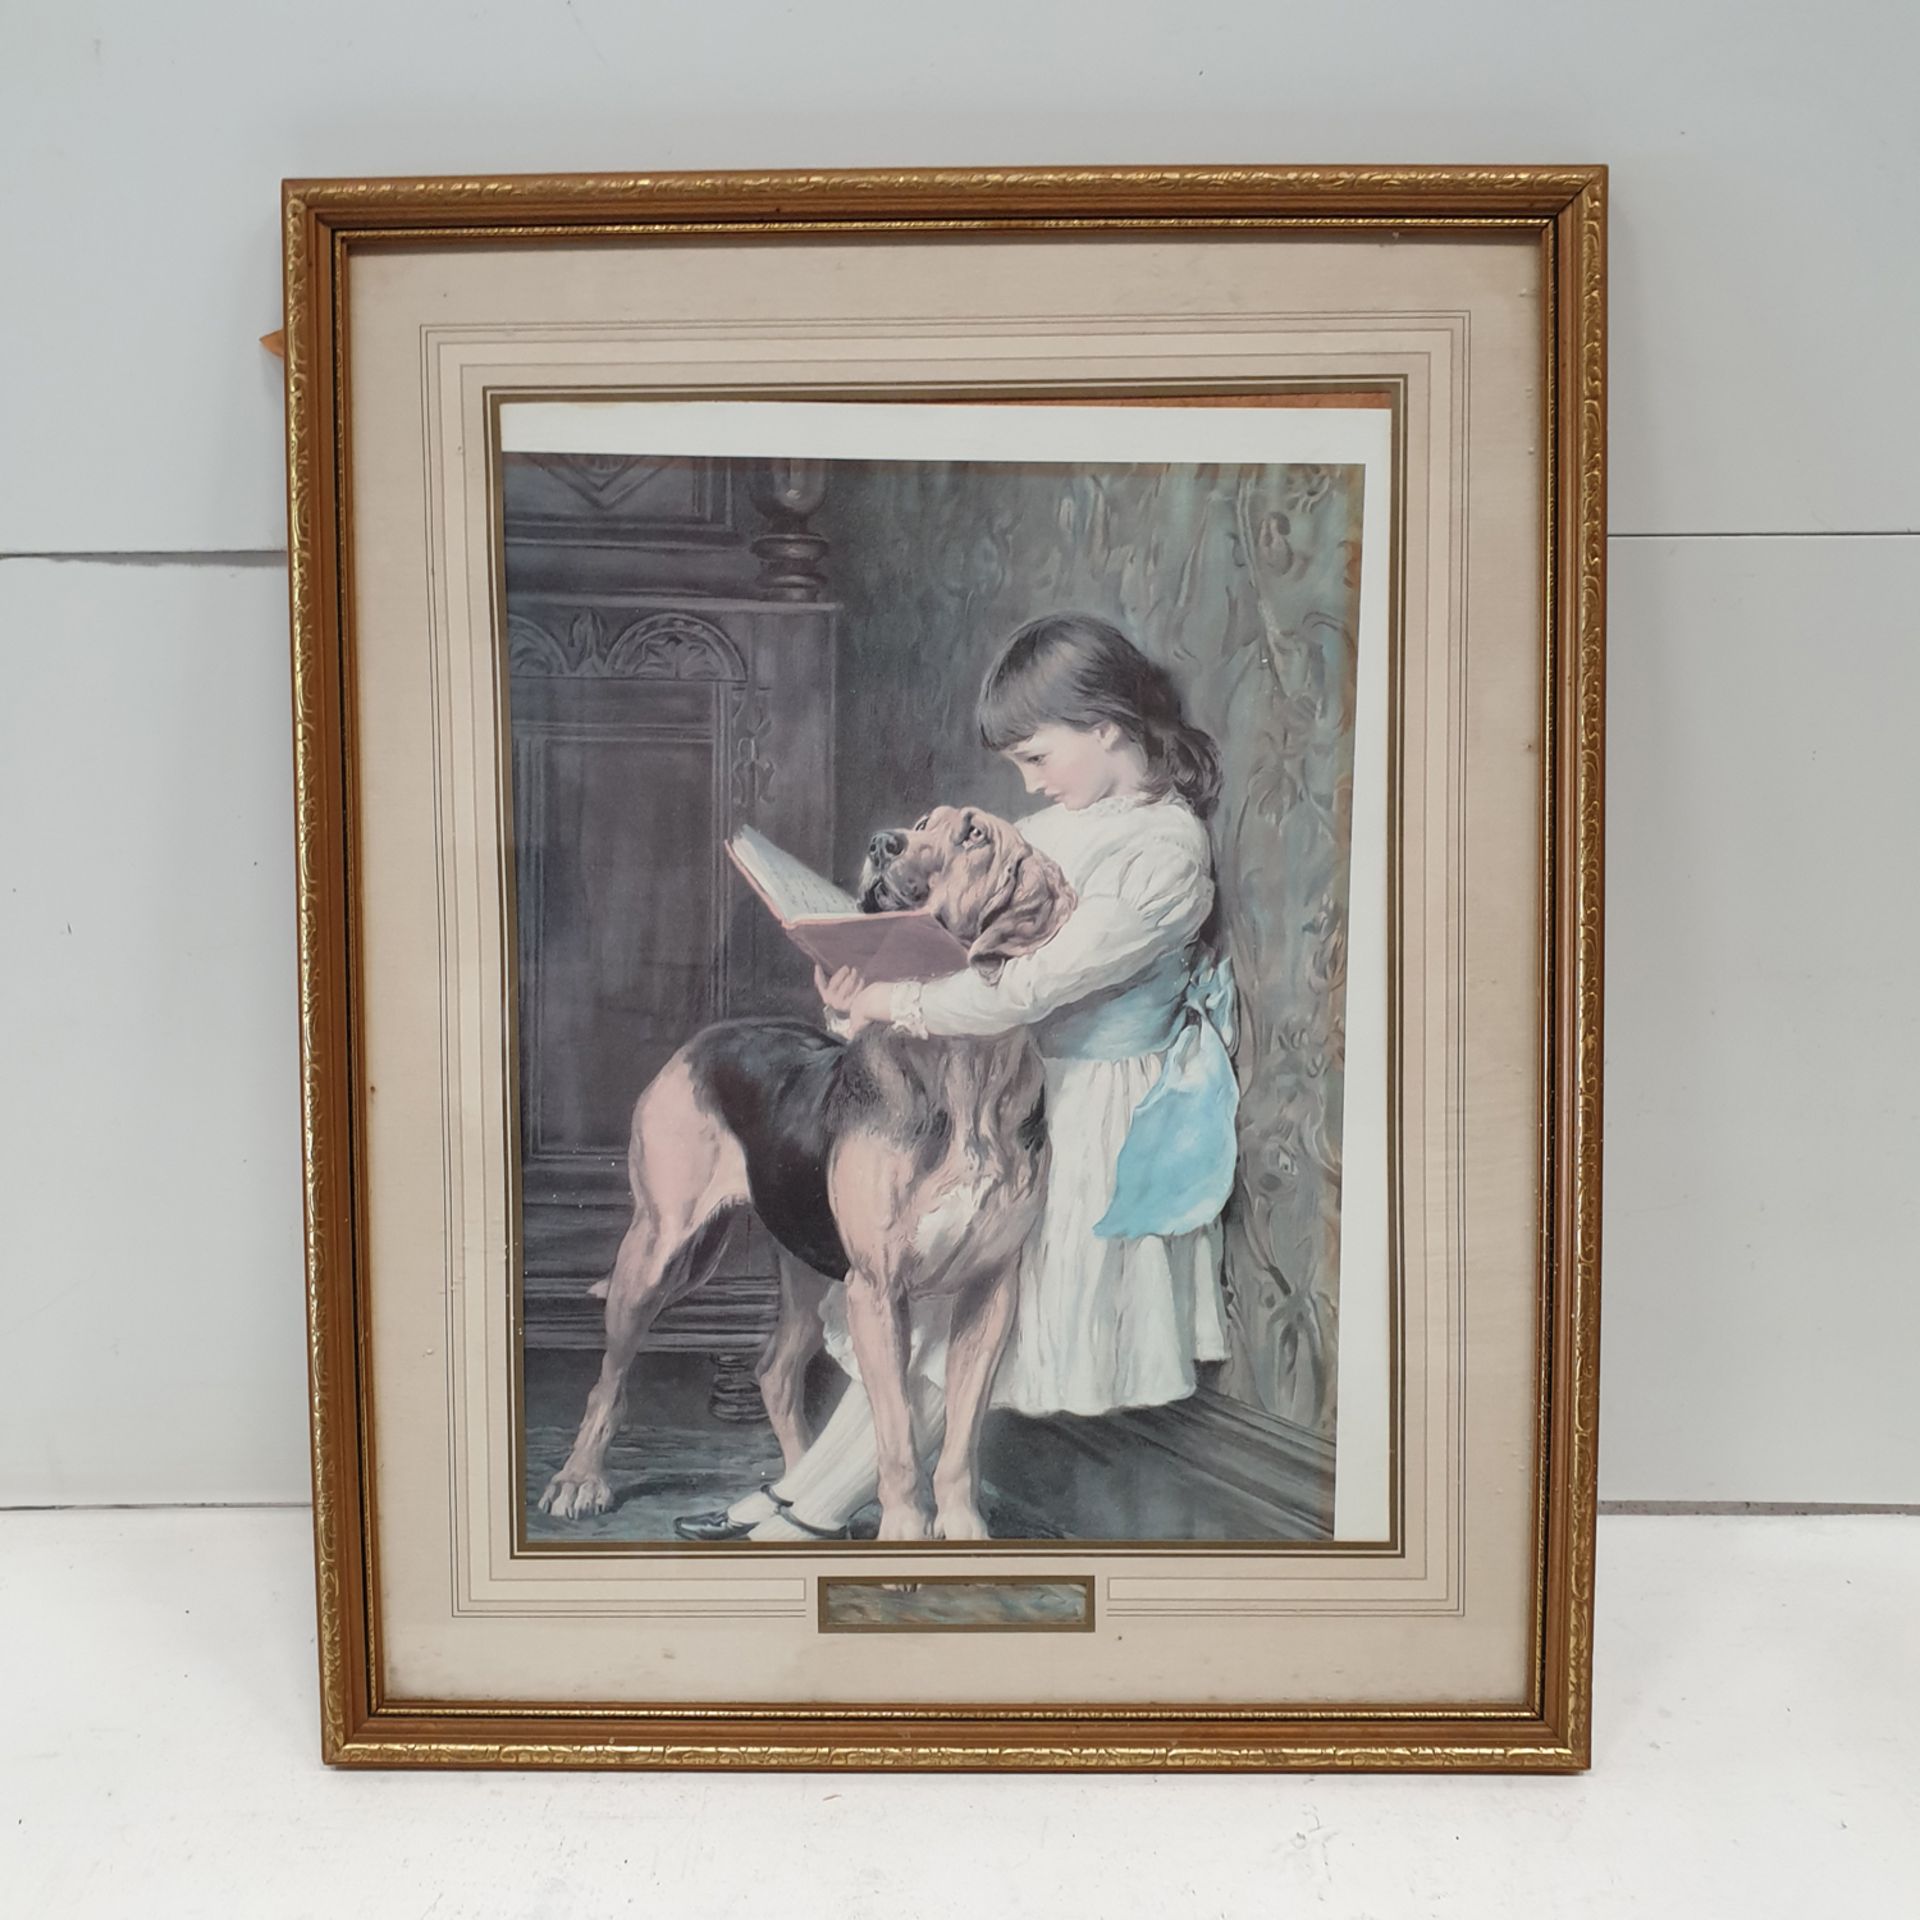 Framed Picture of Girl and Dog. Approx Dimensions 17 1/4" x 21".